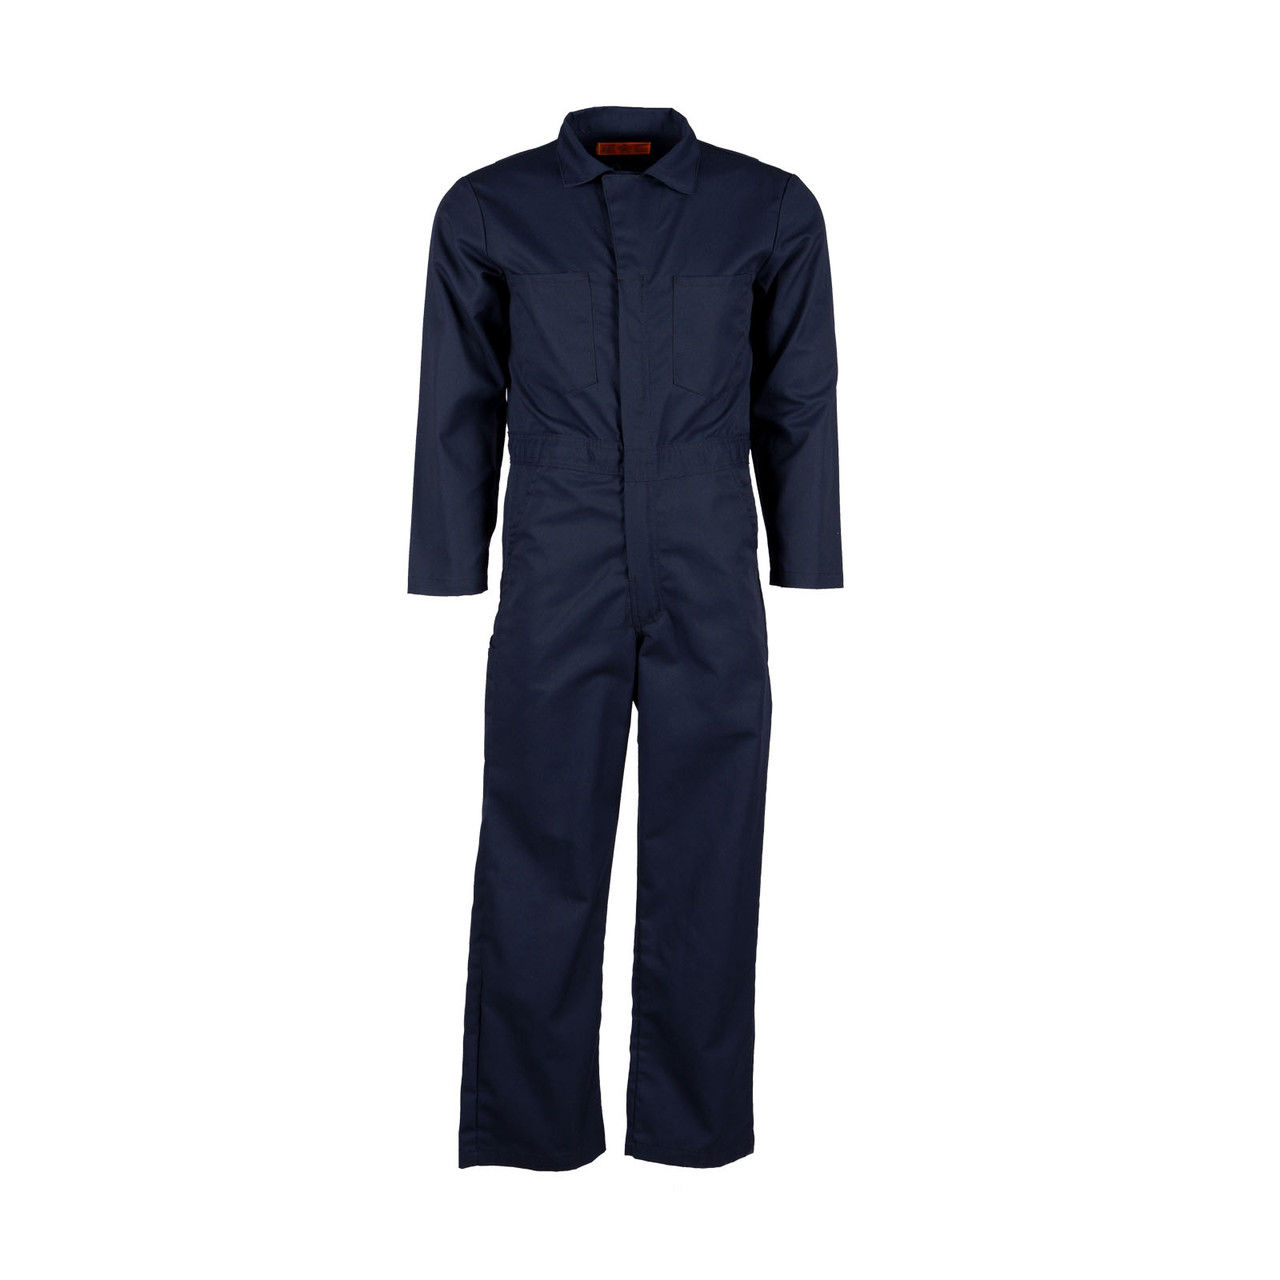 What is the fabric composition of Pinnacle Textile's CV10NV navy coveralls for men?